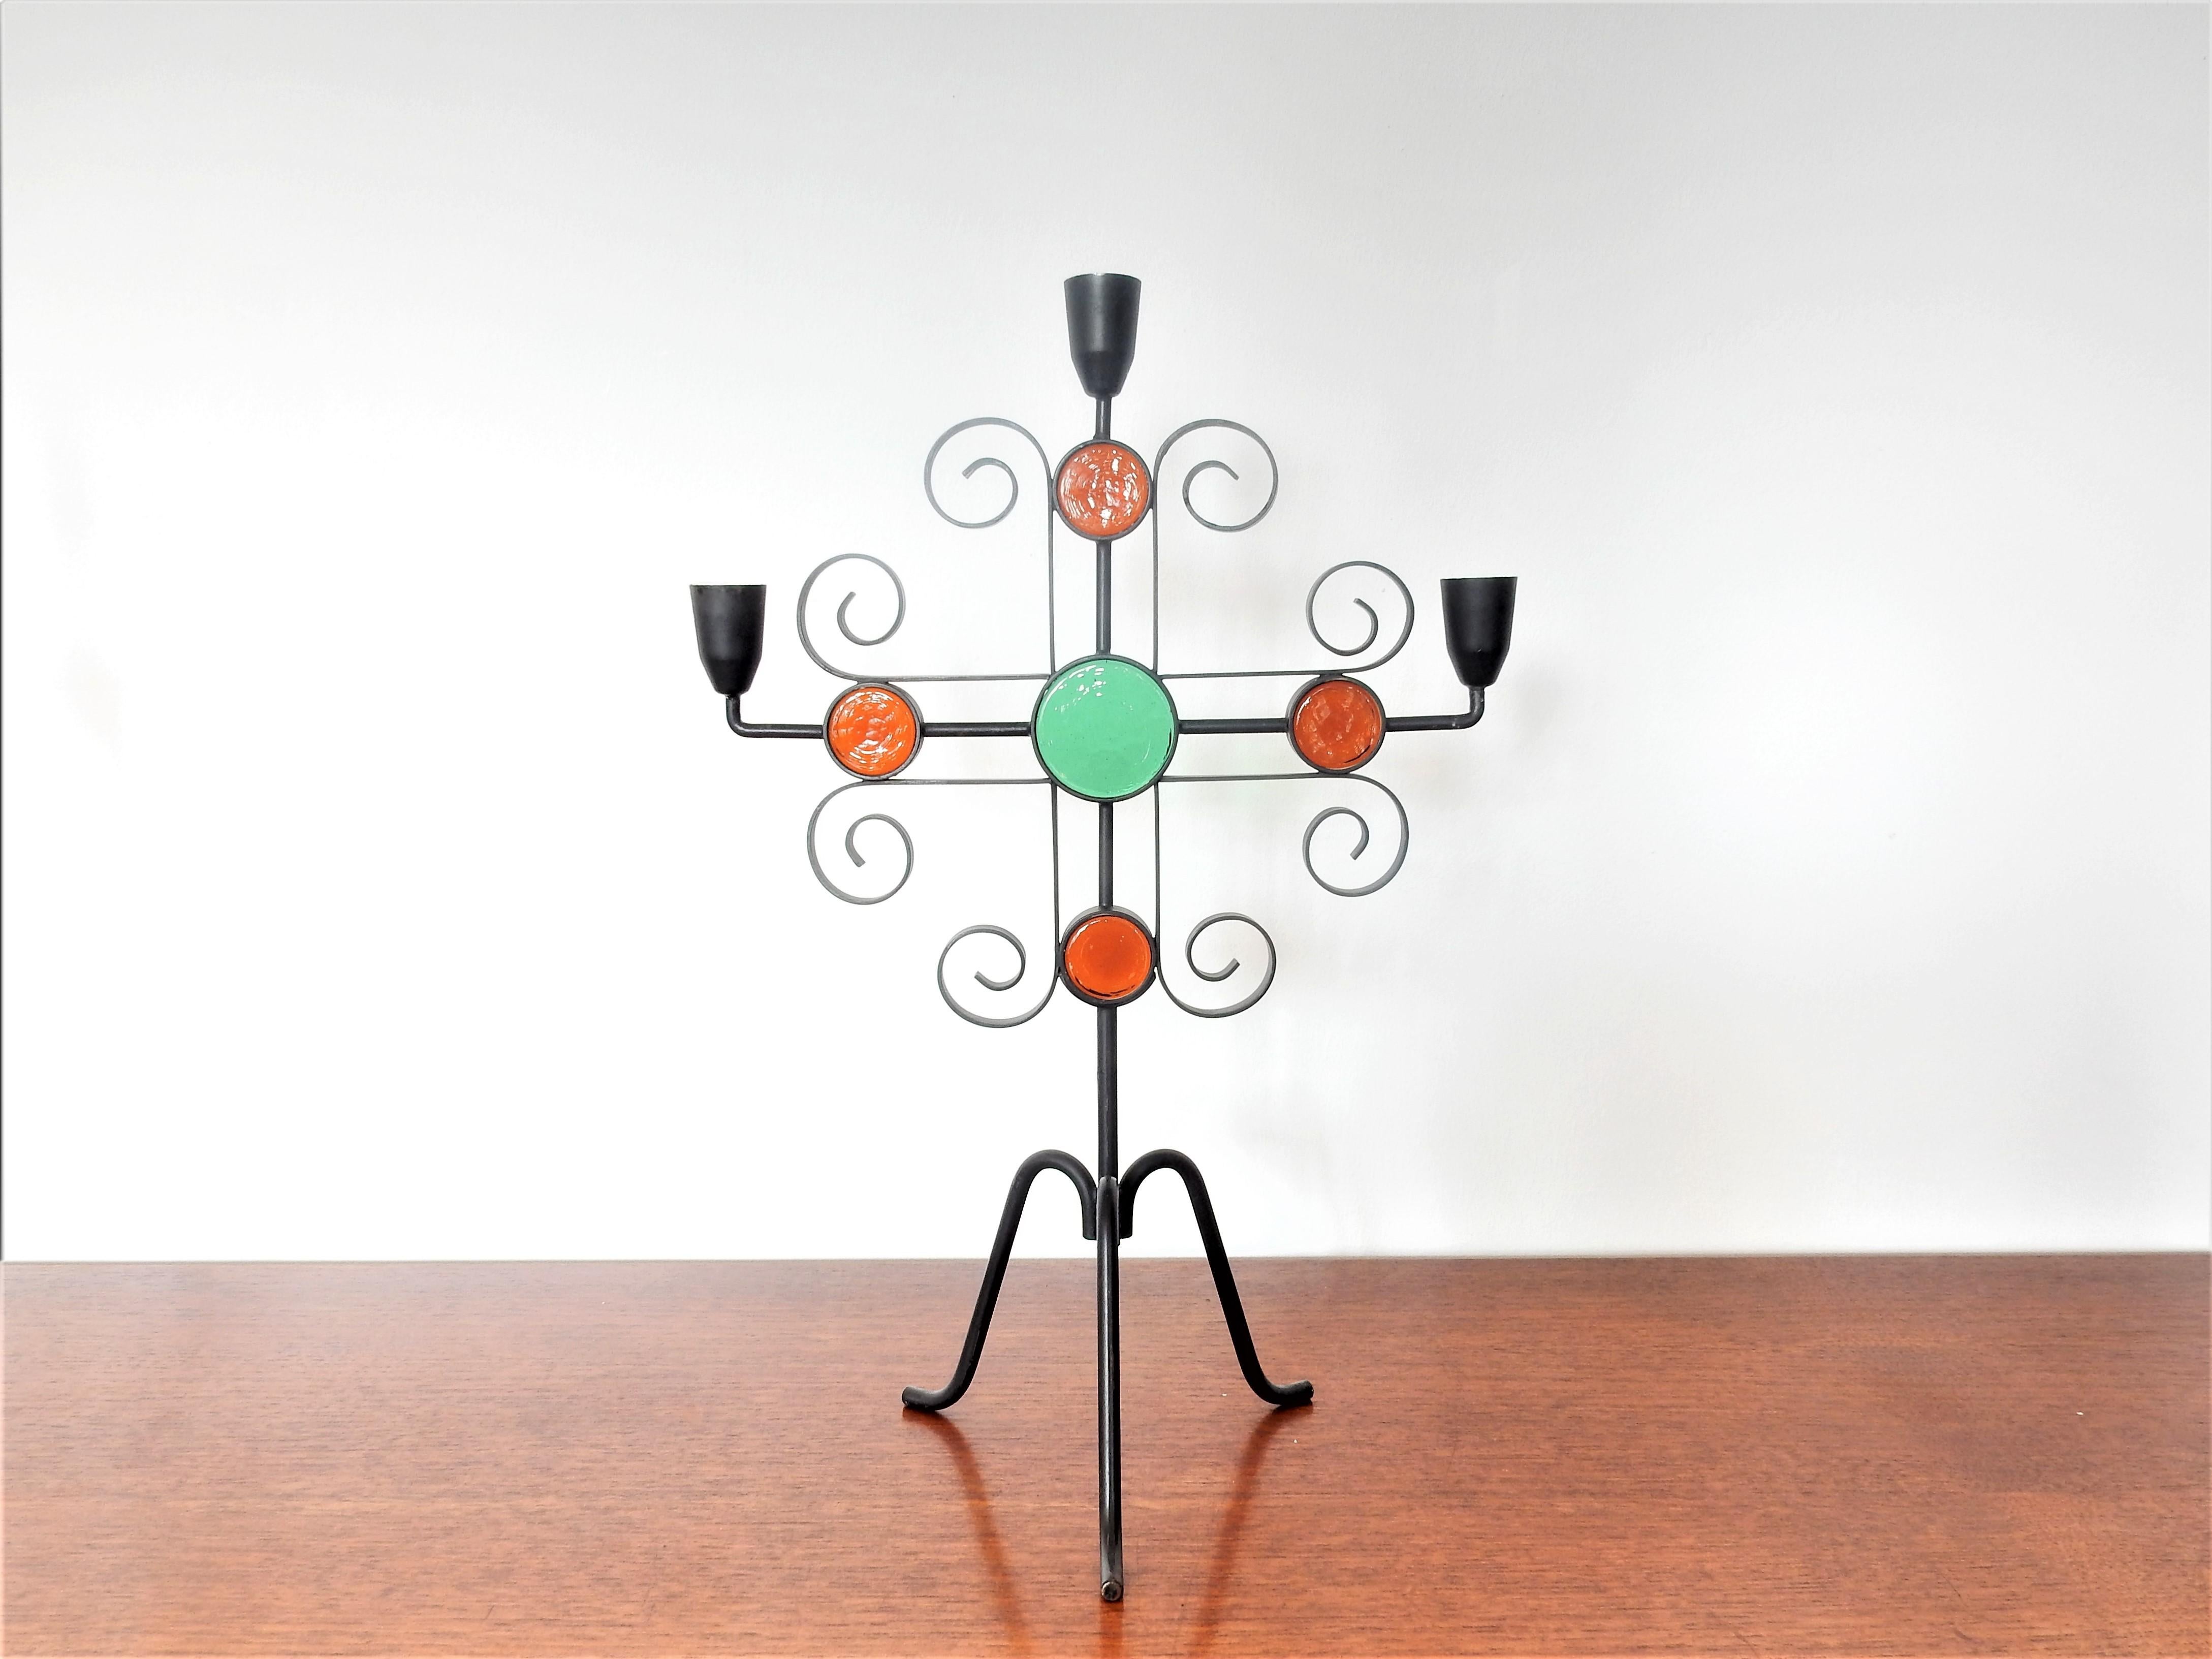 This elegant set of candelabra or candleholders was designed by Gunnar Ander for Ystad Metall in Sweden in the 1960s. The tripod candelabra is made of a black painted wrought iron frame with lighter and darker orange and green round glass inserts. A